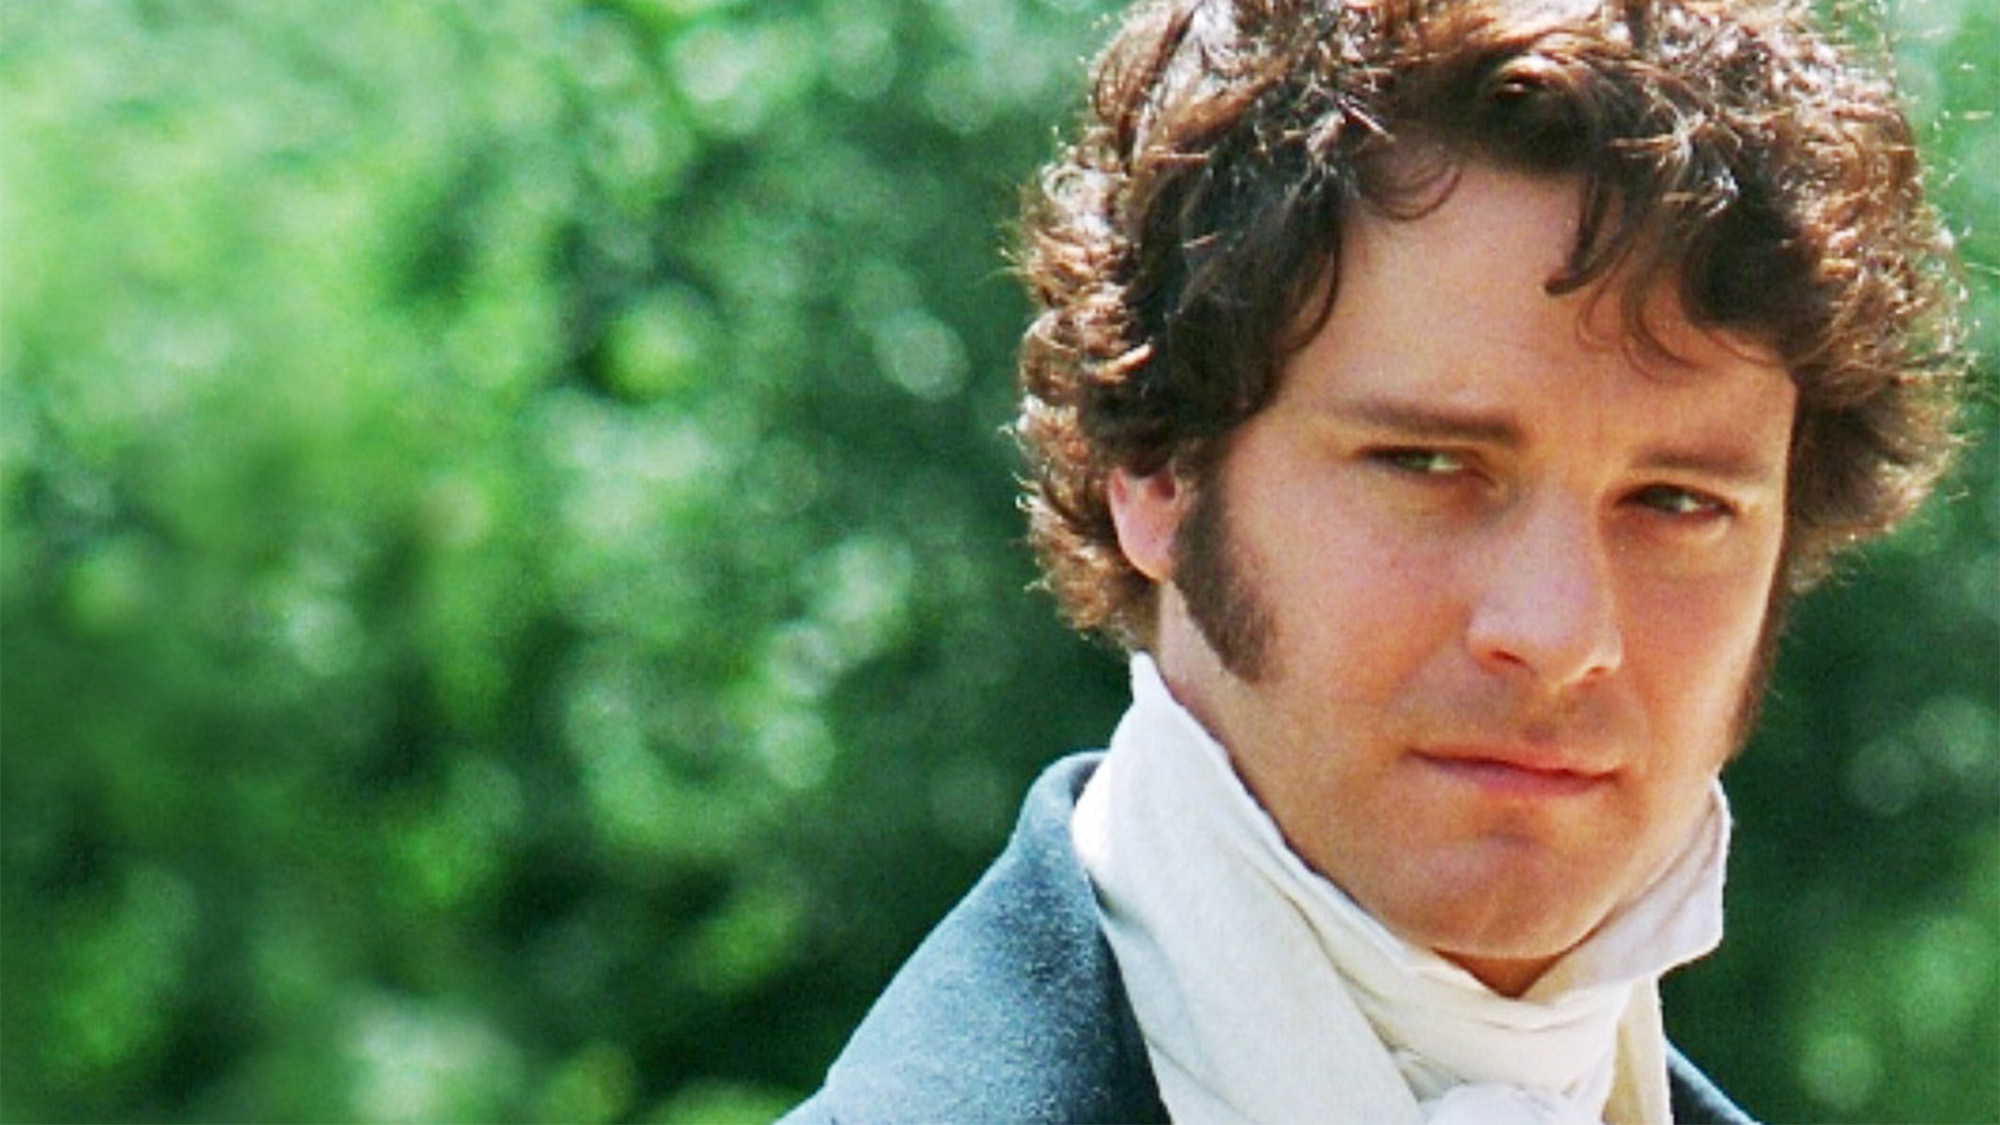 Is Mr Darcy supposed to be handsome?